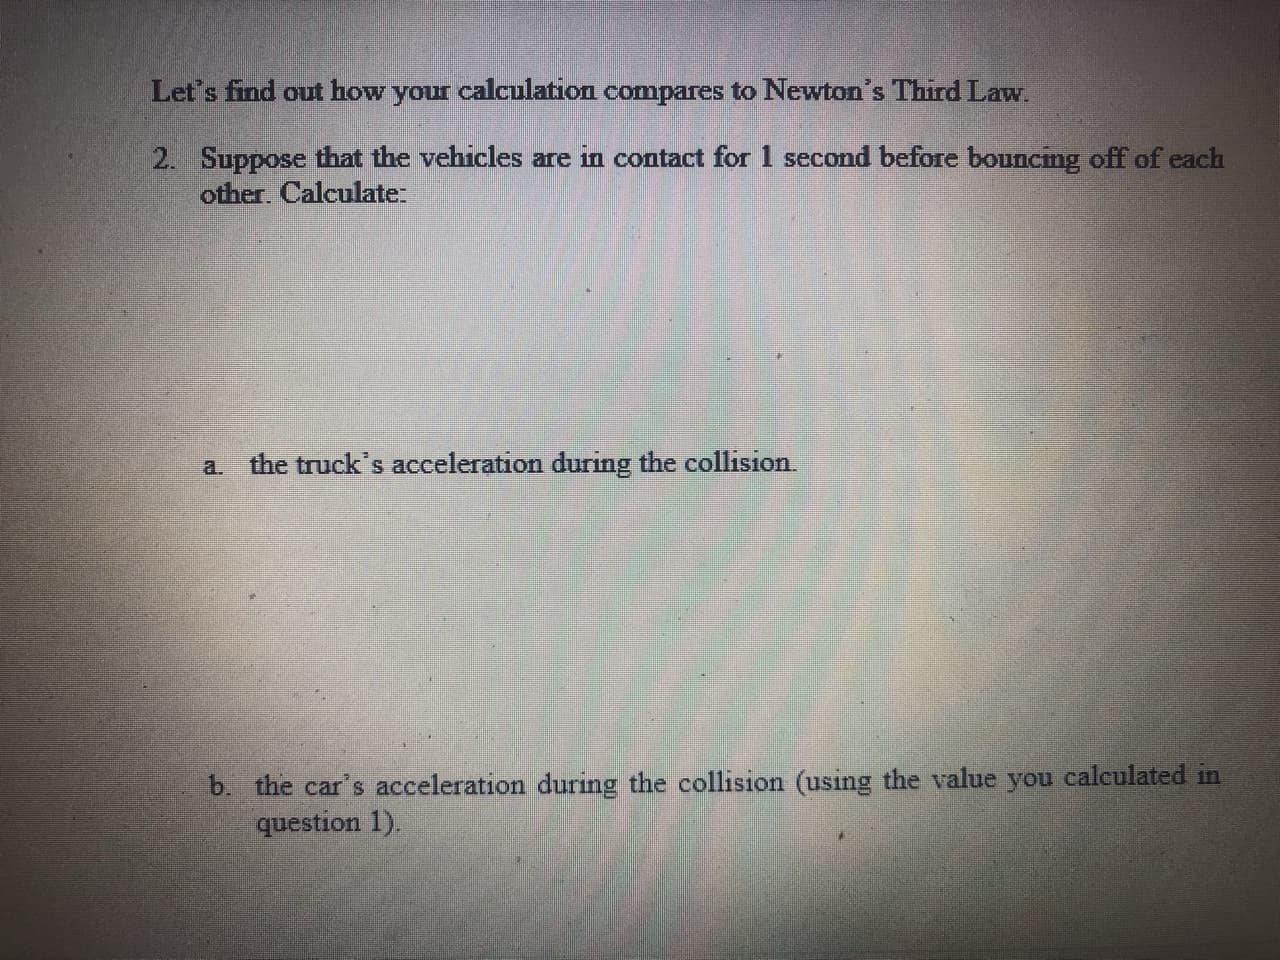 Let's find out how your calculation compares to Newton's Third Law.
2. Suppose that the vehicles are in contact for 1 second before bouncmg off of each
other. Calculate:
a. the truck's acceleration during the collision.
b. the car's acceleration during the collision (using the value you calculated in
question 1).
